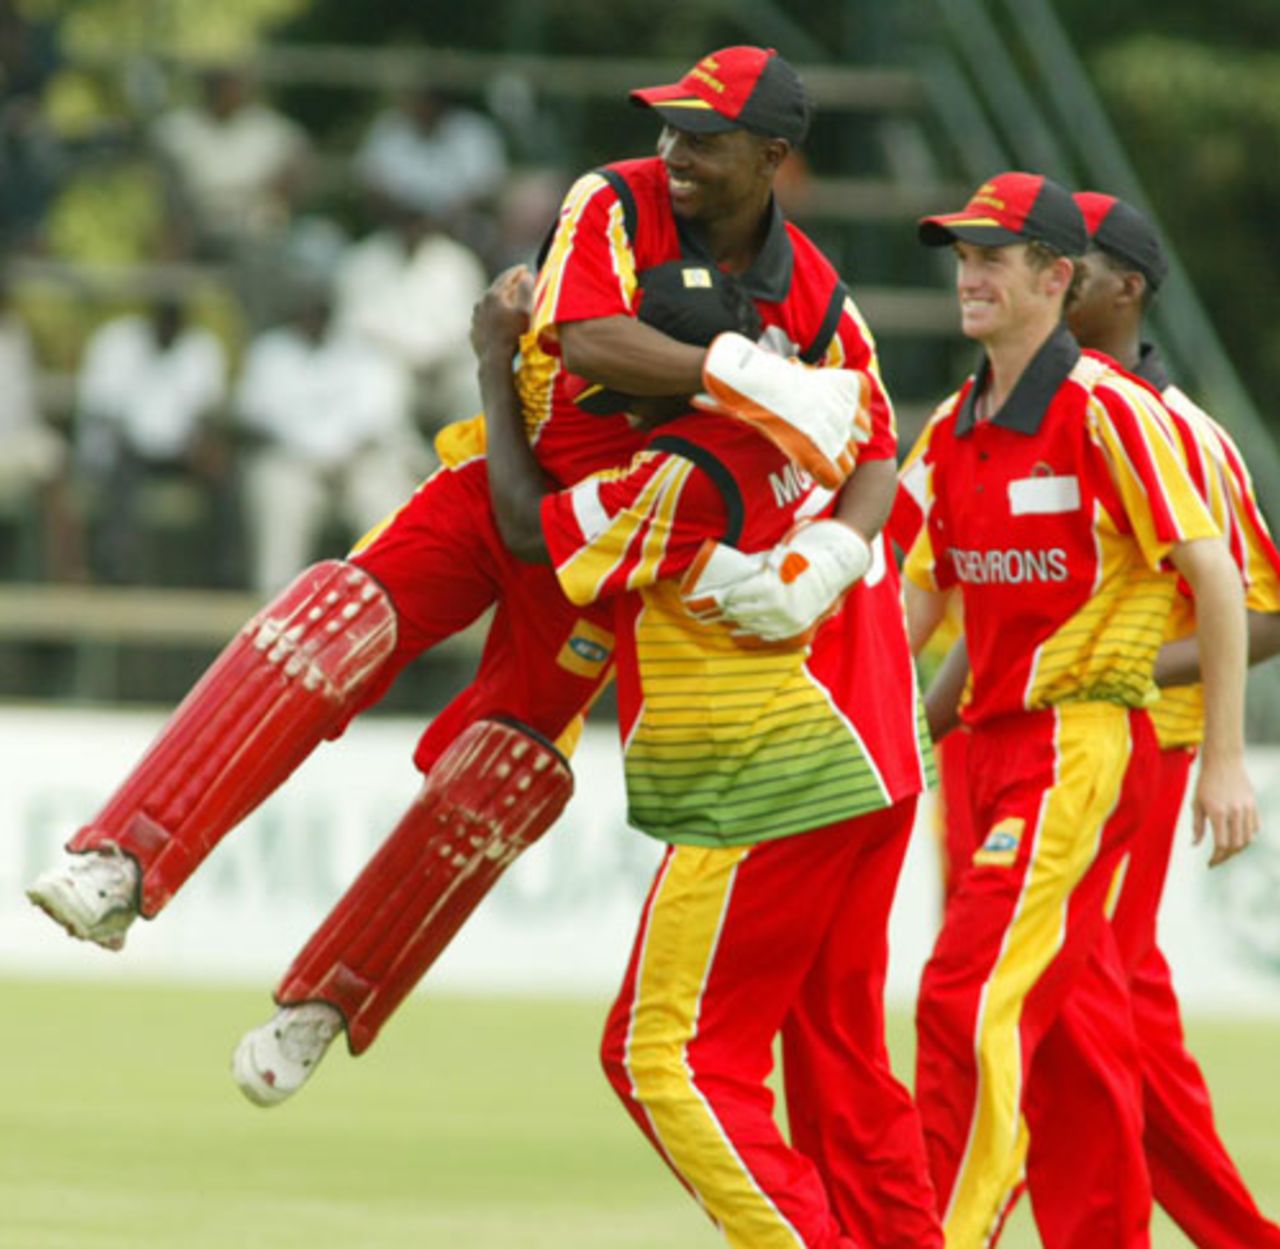 Zimbabwe's players celebrate their first win in the MTN Domestic Championship, Zimbabwe Chevrons v Cape Cobras, MTN Domestic Championship, Harare, February 17, 2008